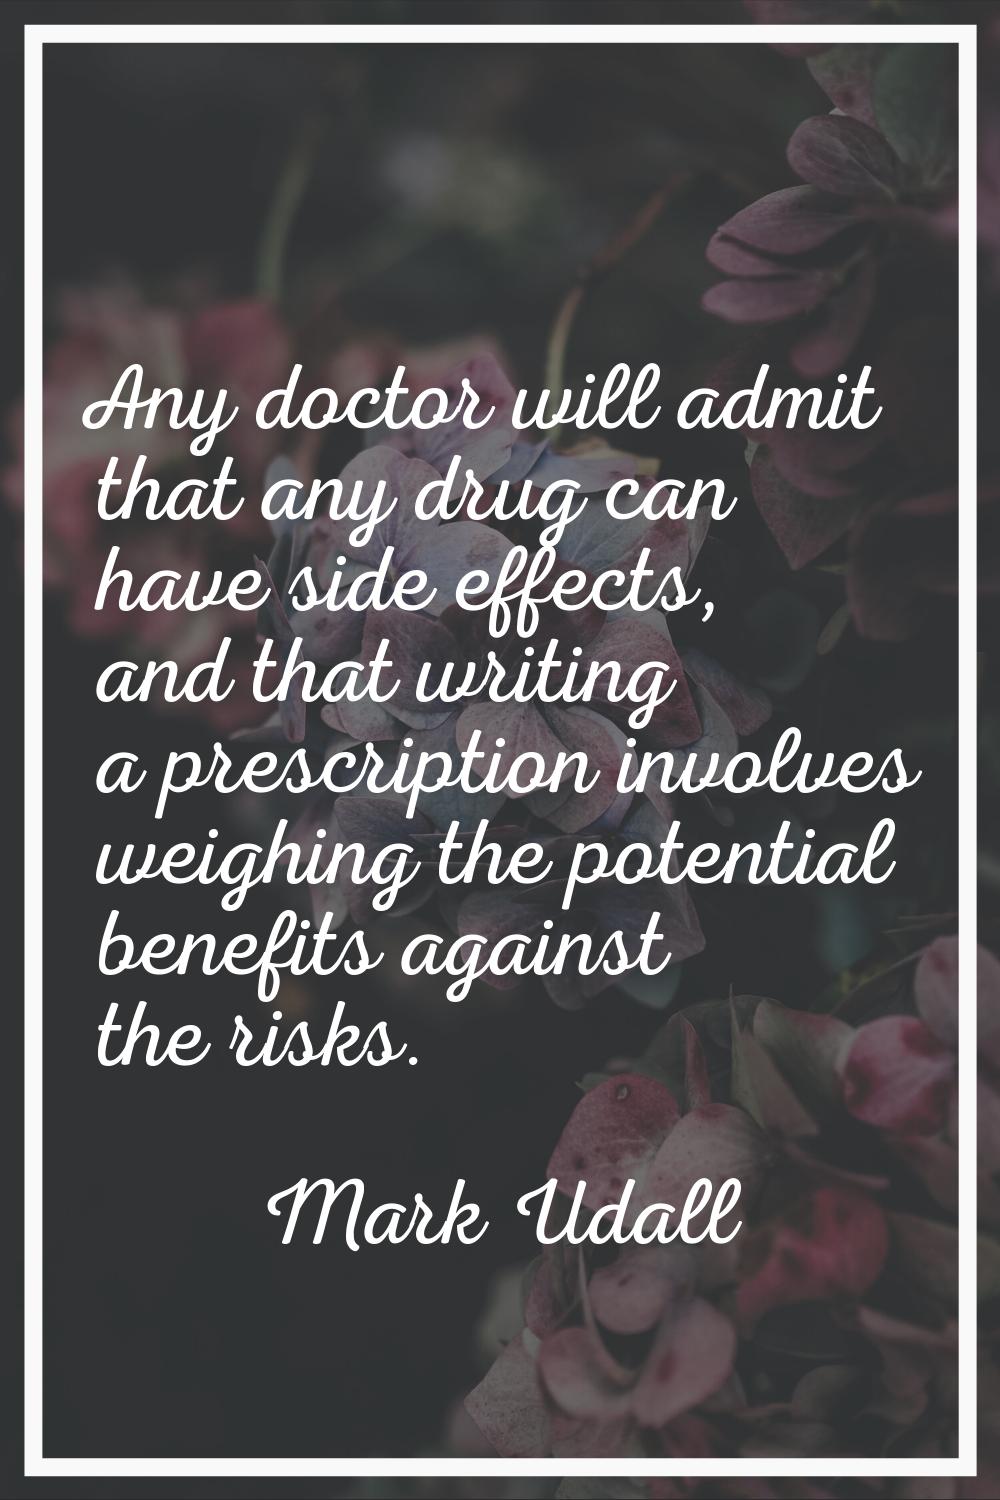 Any doctor will admit that any drug can have side effects, and that writing a prescription involves